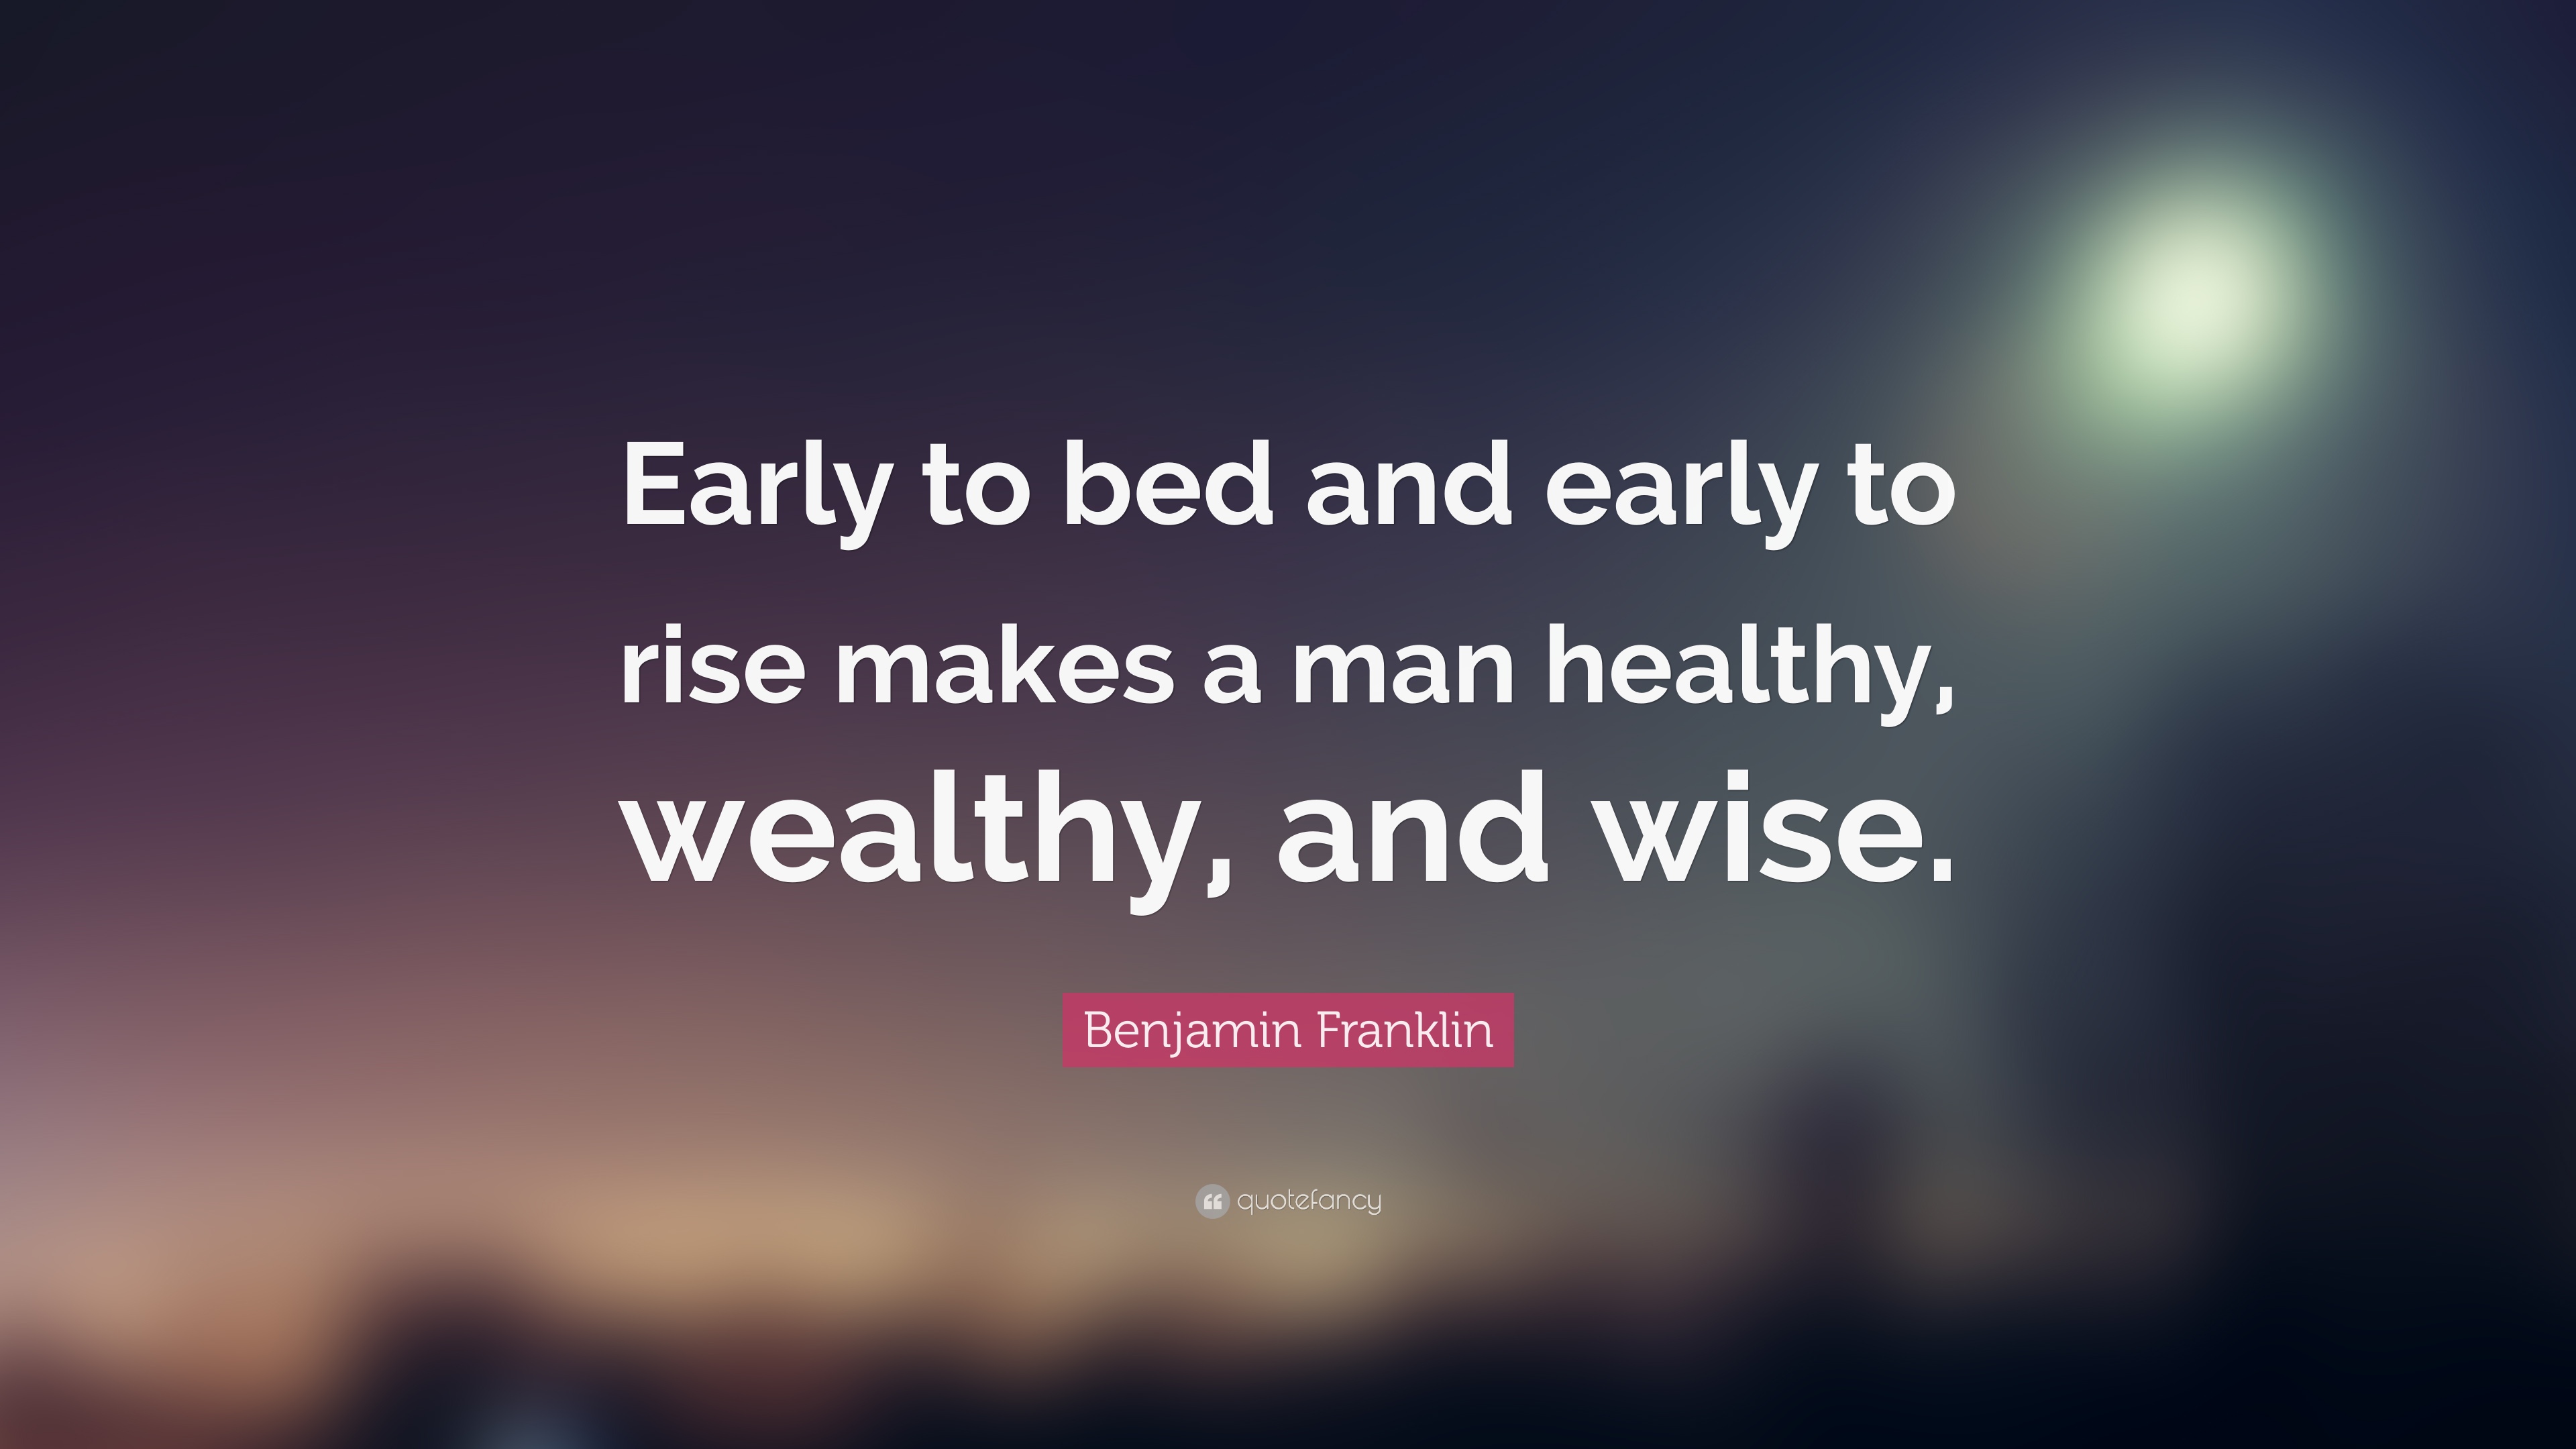 Benjamin Franklin Quote: “Early to bed and early to rise makes a man healthy